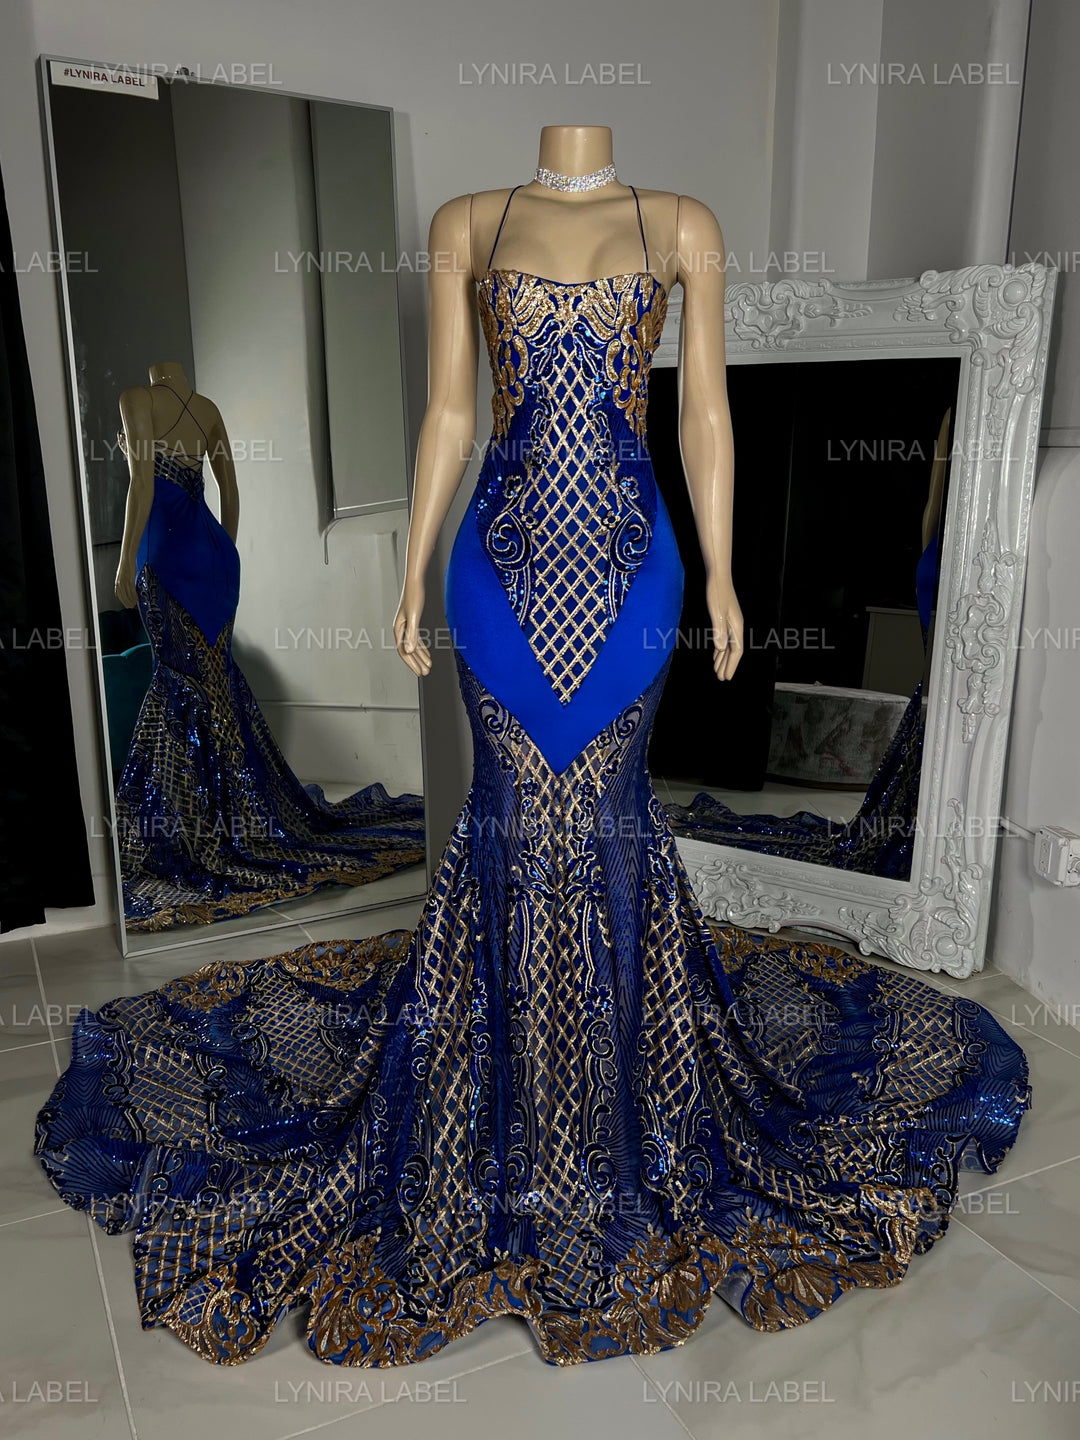 The Royalty Gown